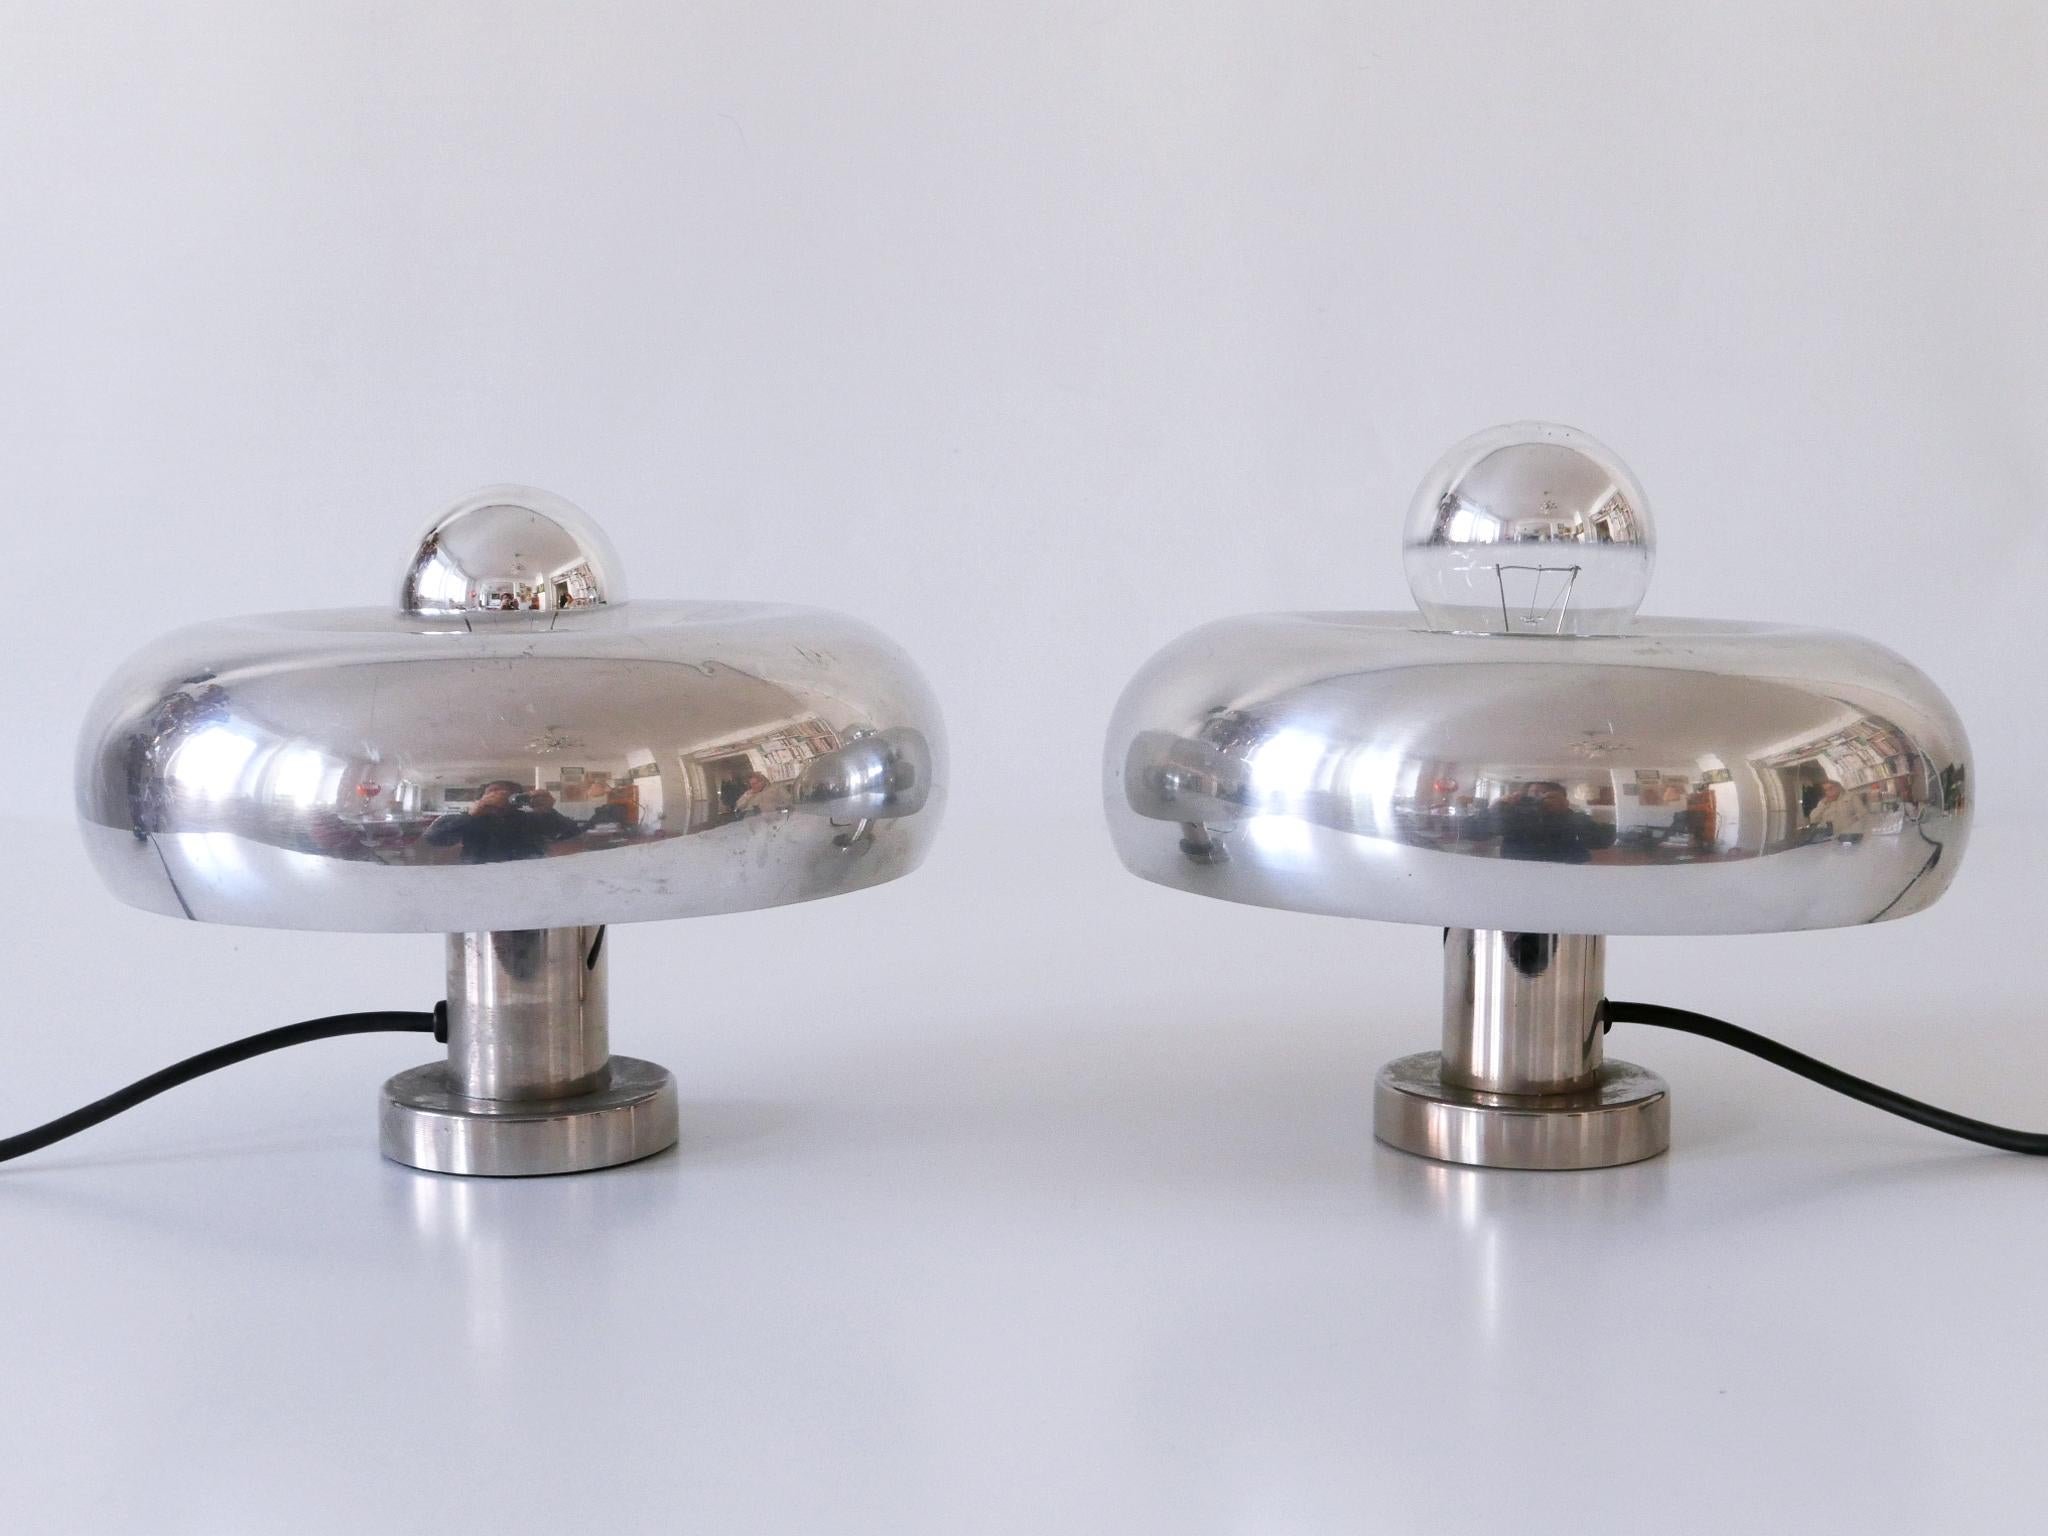 Set of Two Table Lamps or Sconces Pox by Ingo Maurer for Design M Germany, 1960s For Sale 7